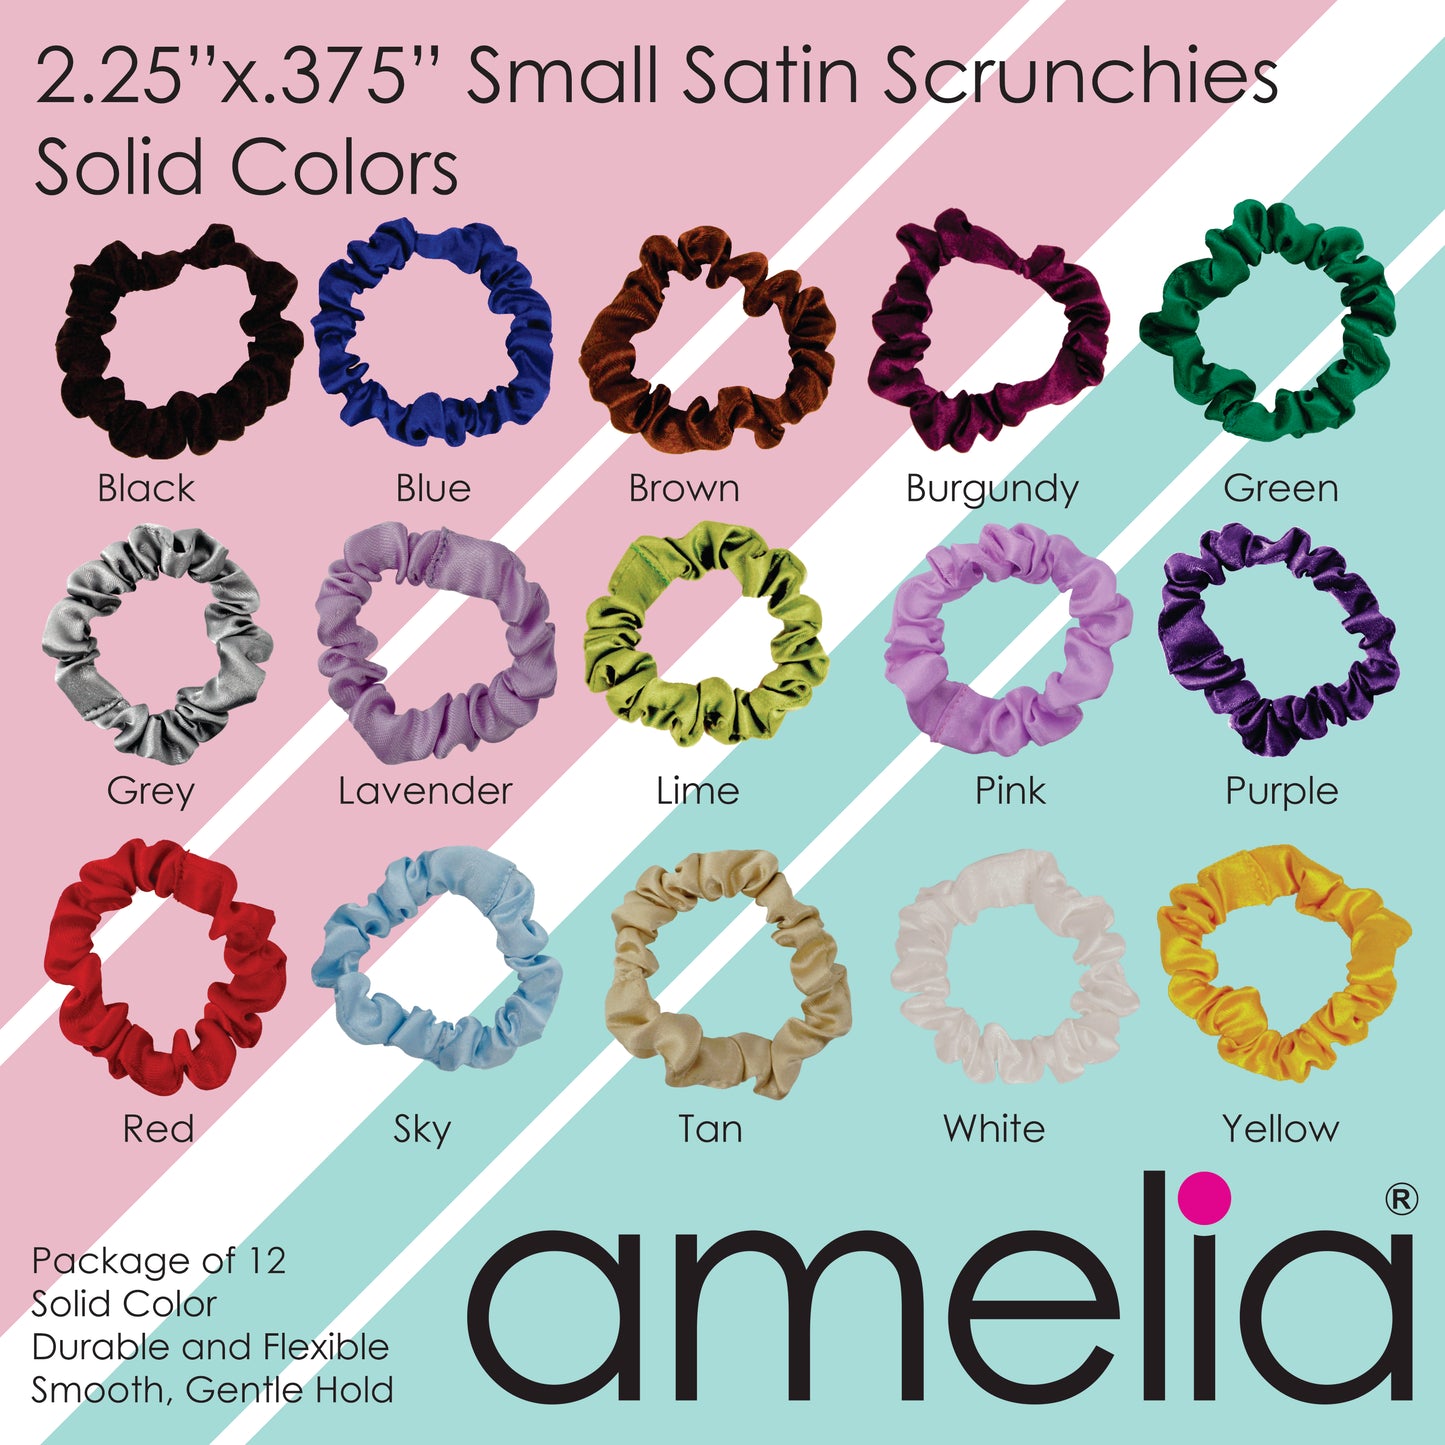 Amelia Beauty, Lavender Satin Scrunchies, 2.25in Diameter, Gentle on Hair, Strong Hold, No Snag, No Dents or Creases. 12 Pack